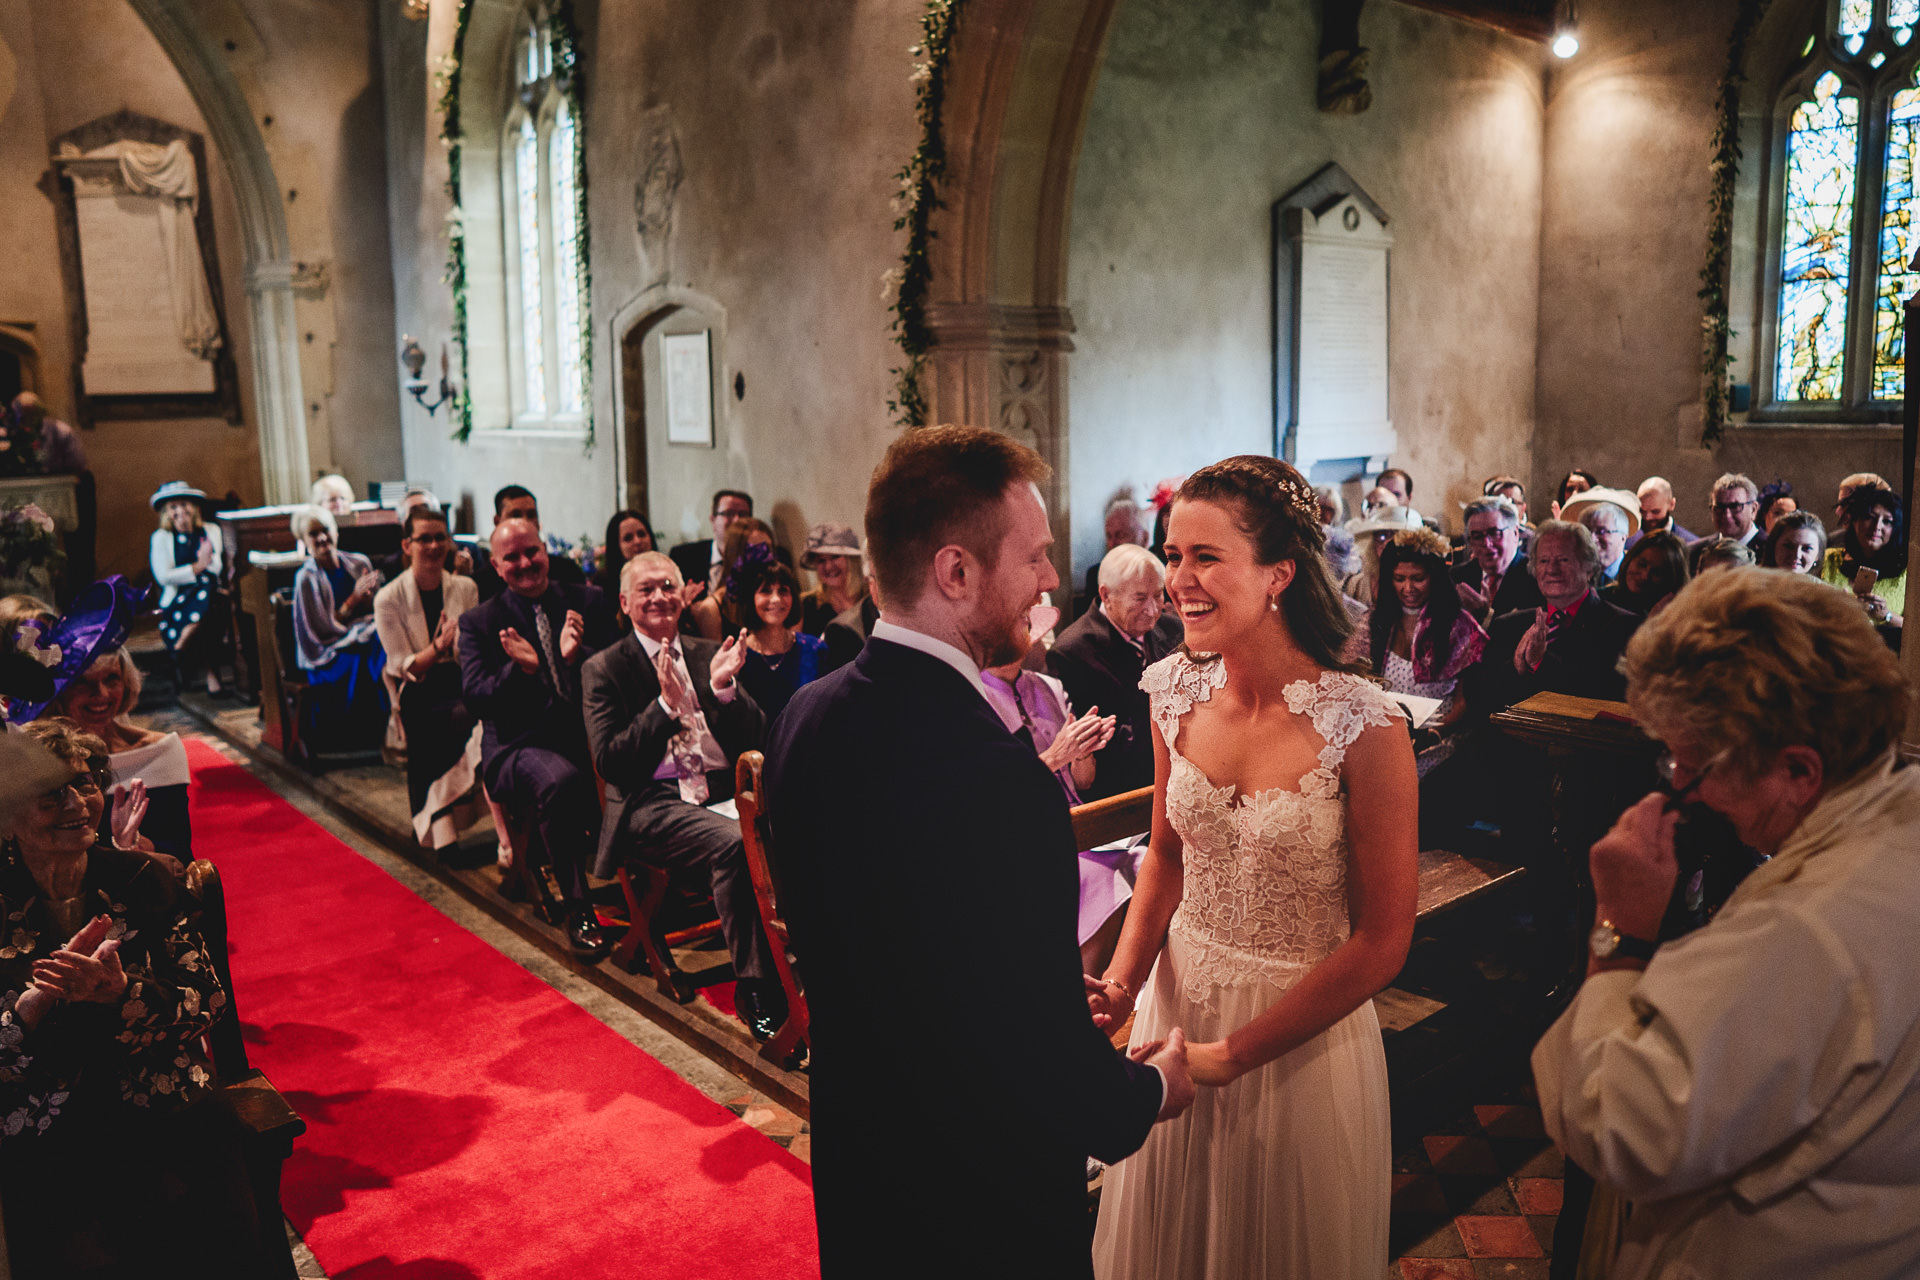 Bride and groom smiling at each other while guests applaud in church